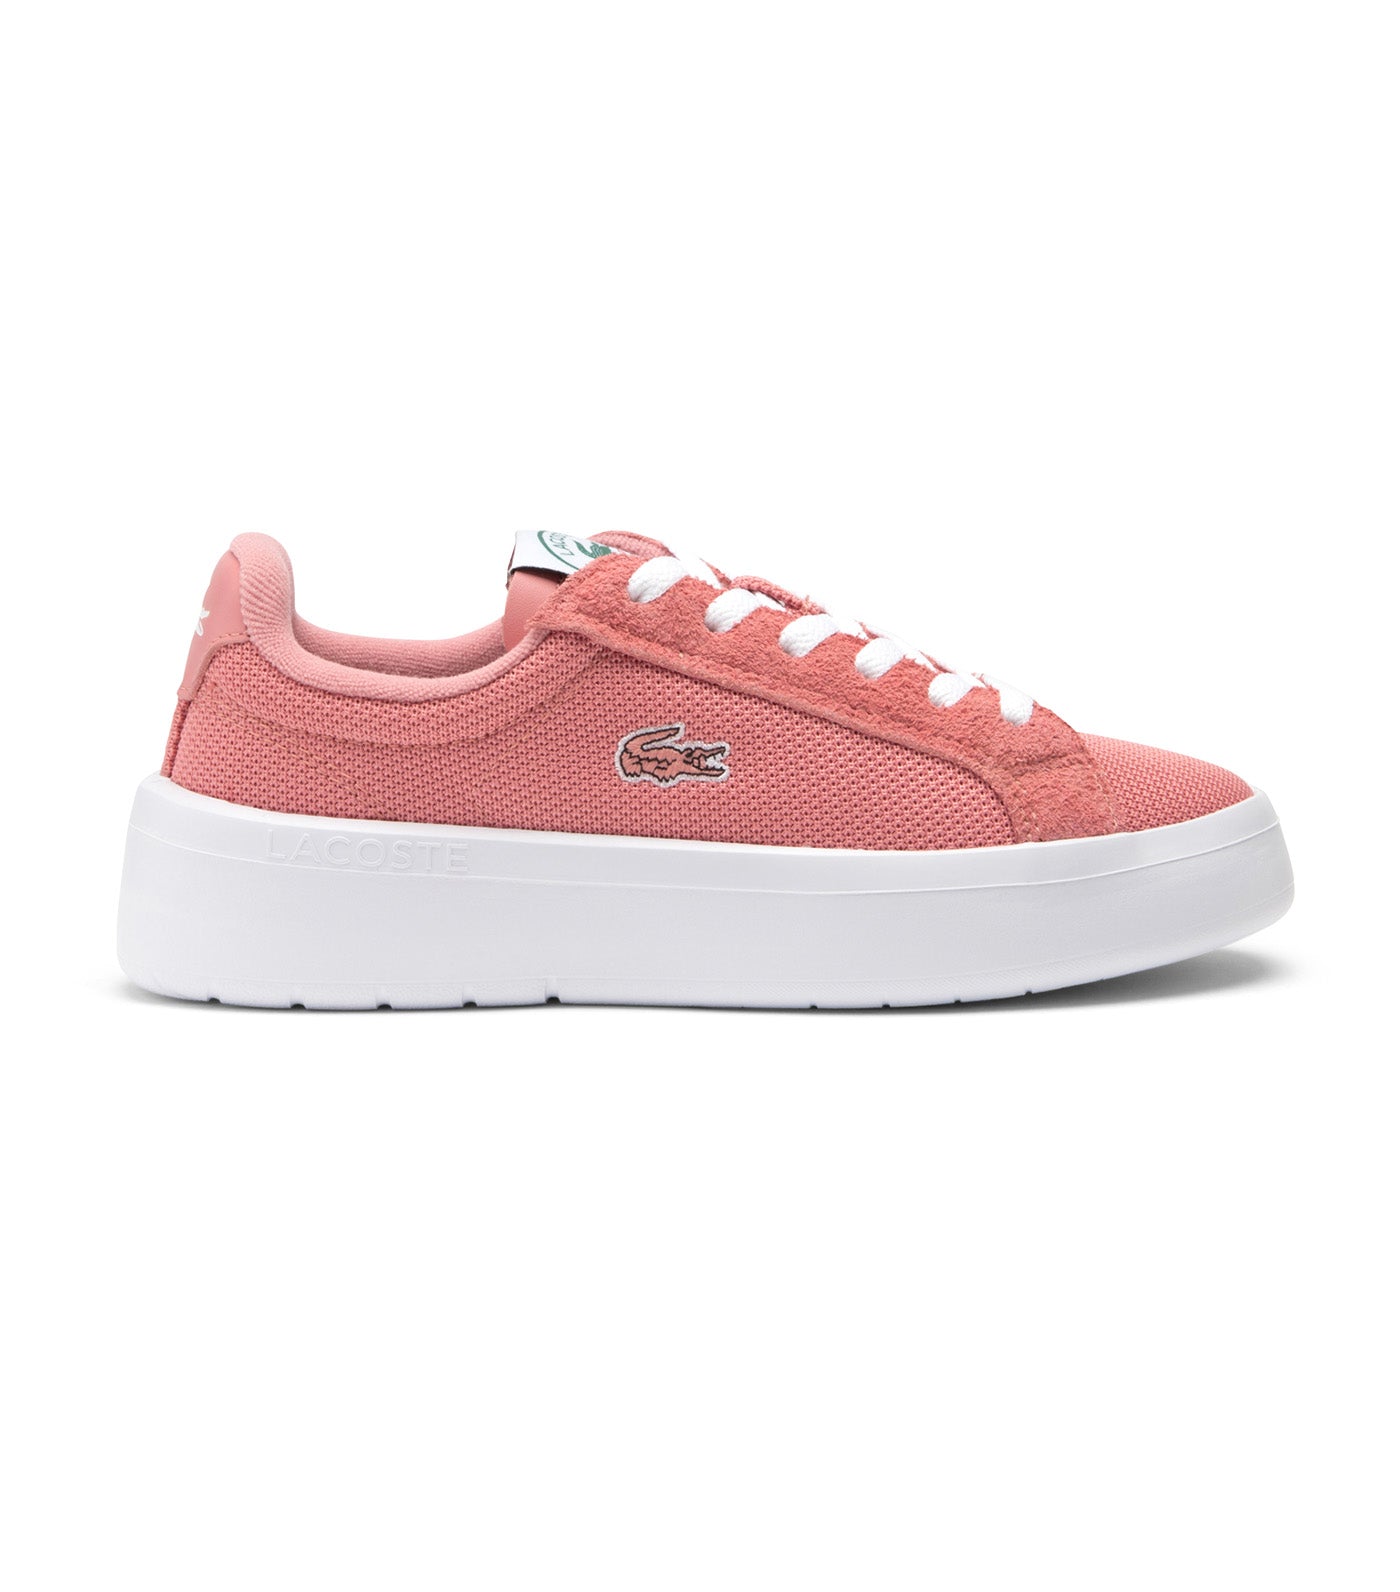 Women's Carnaby Platform Shoes Pink/White